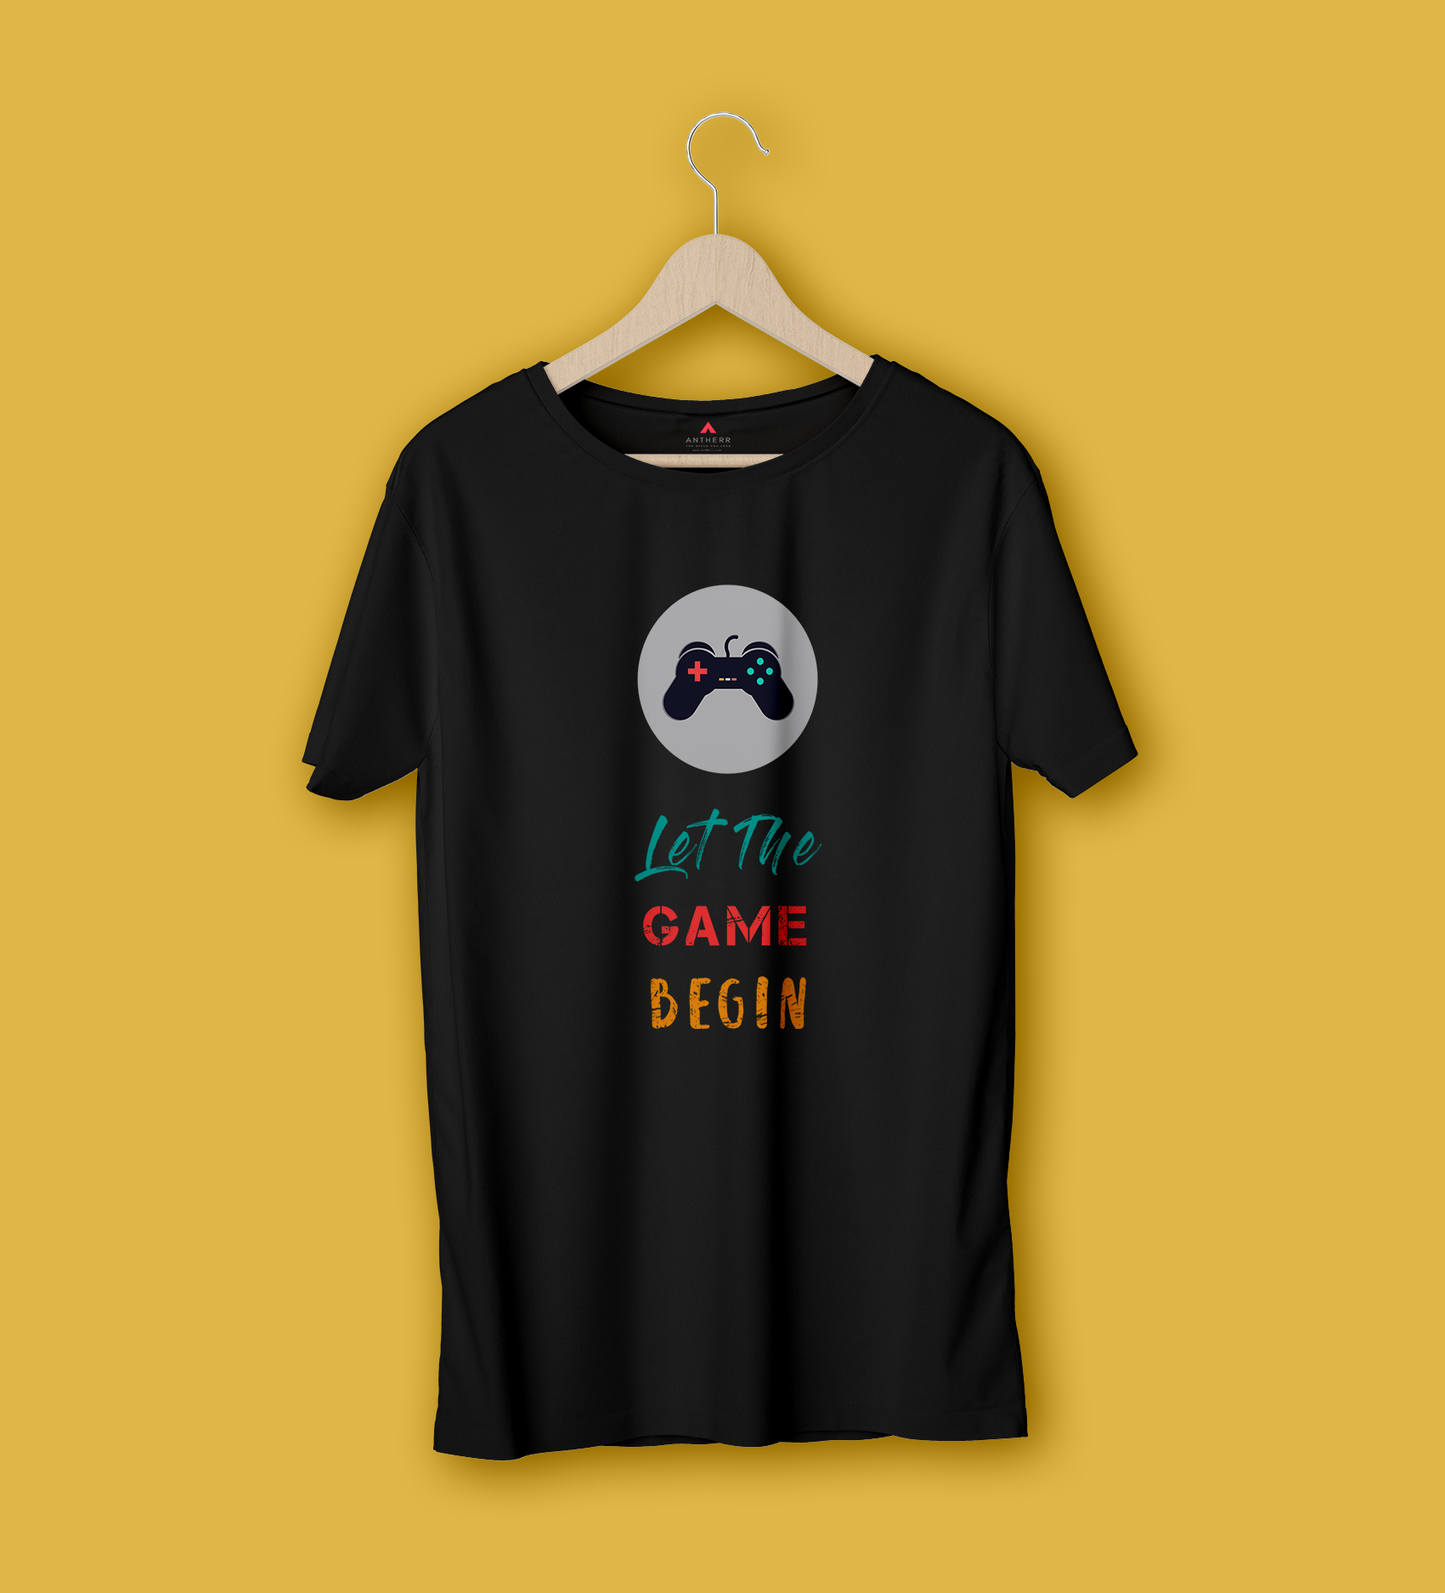 "LET THE GAME BEGIN" - HALF-SLEEVE T-SHIRTS